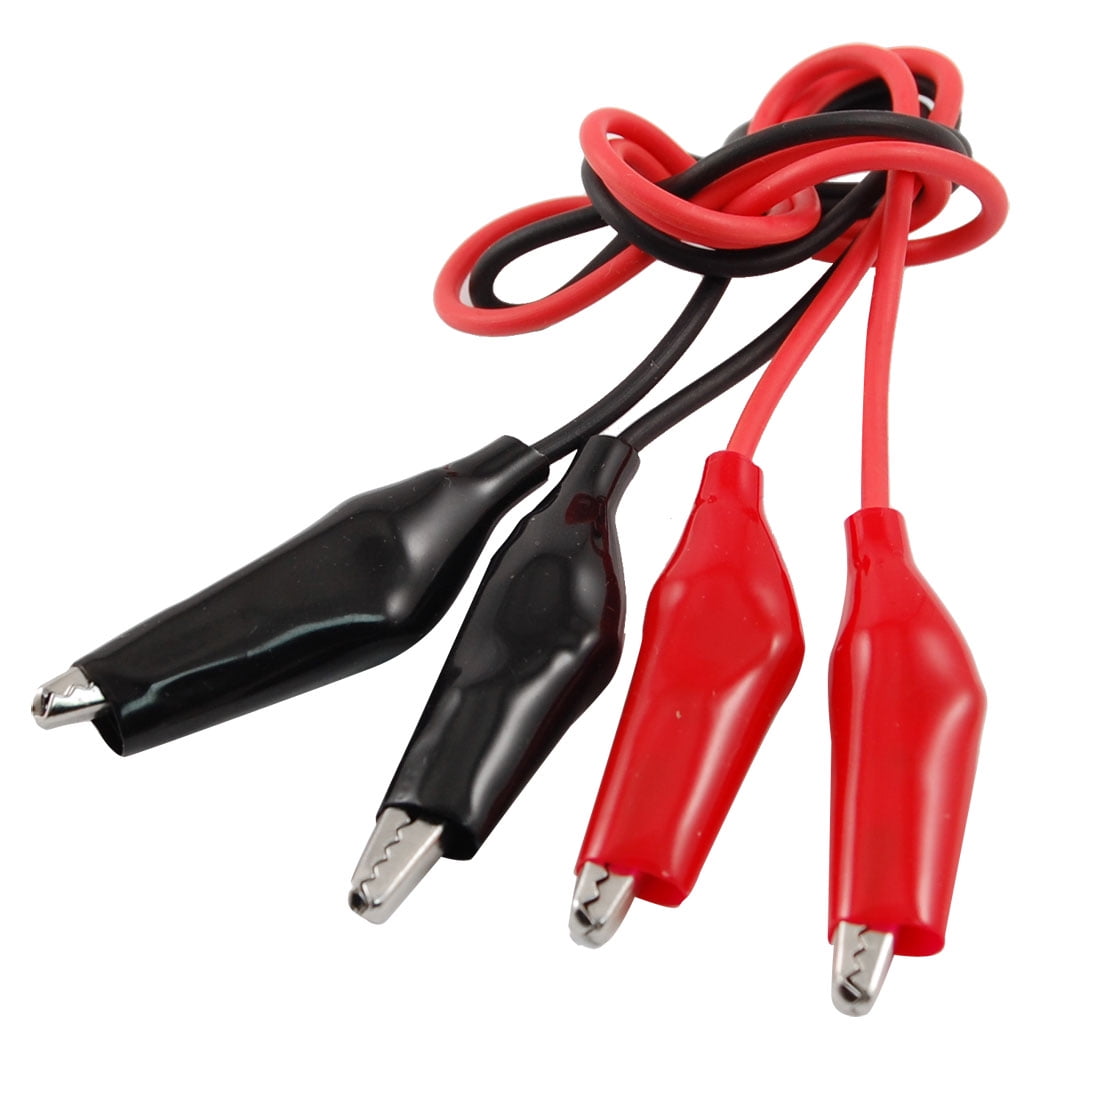 Dual Red&Black Test Leads with Crocodile Clips Alligator Jumper Cable Wire 105cm 